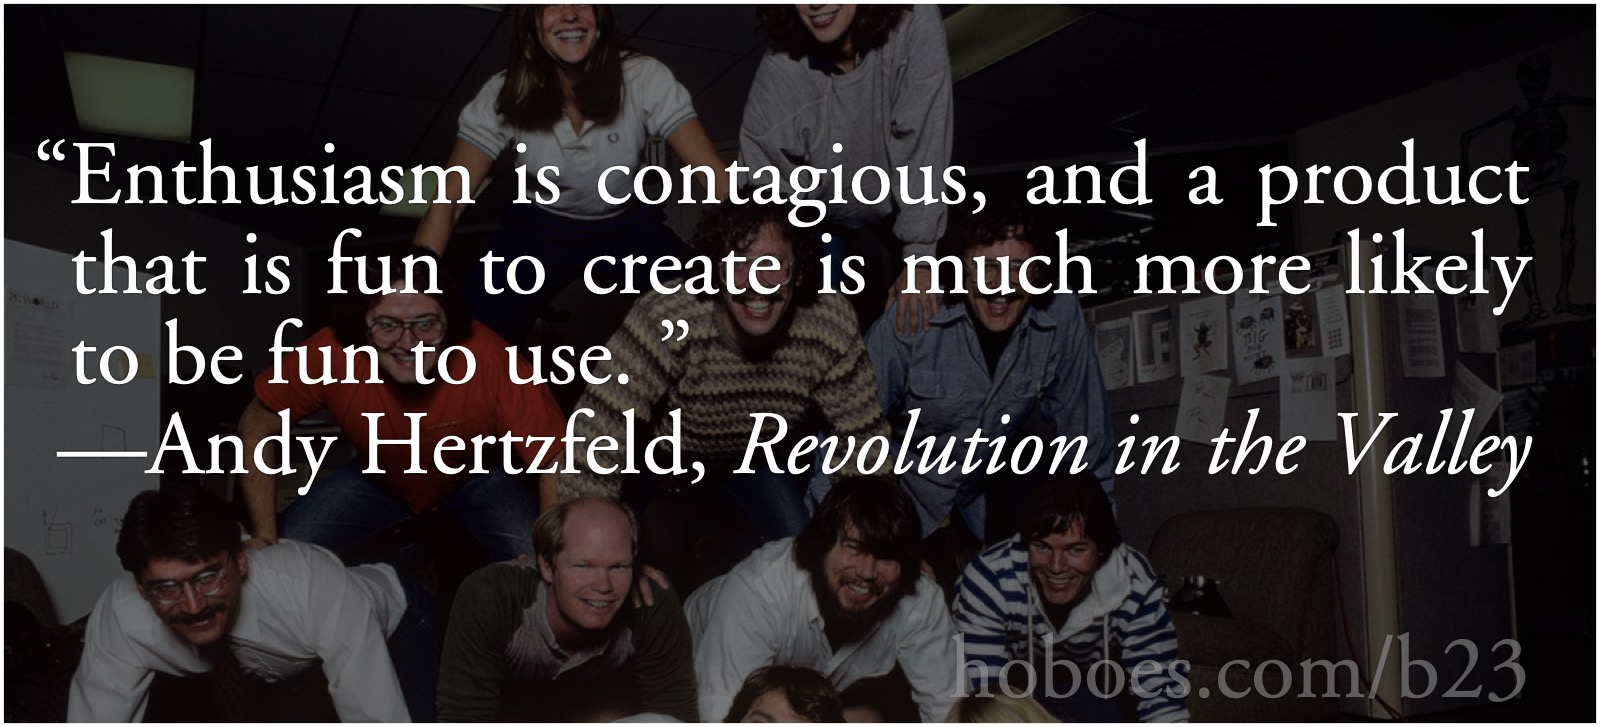 Andy Hertzfeld, contagious enthusiasm: “Enthusiasm is contagious, and a product that is fun to create is much more likely to be fun to use. ”—Andy Hertzfeld, Revolution in the Valley, 279; Macintosh; design; computer history; Andy Hertzfeld